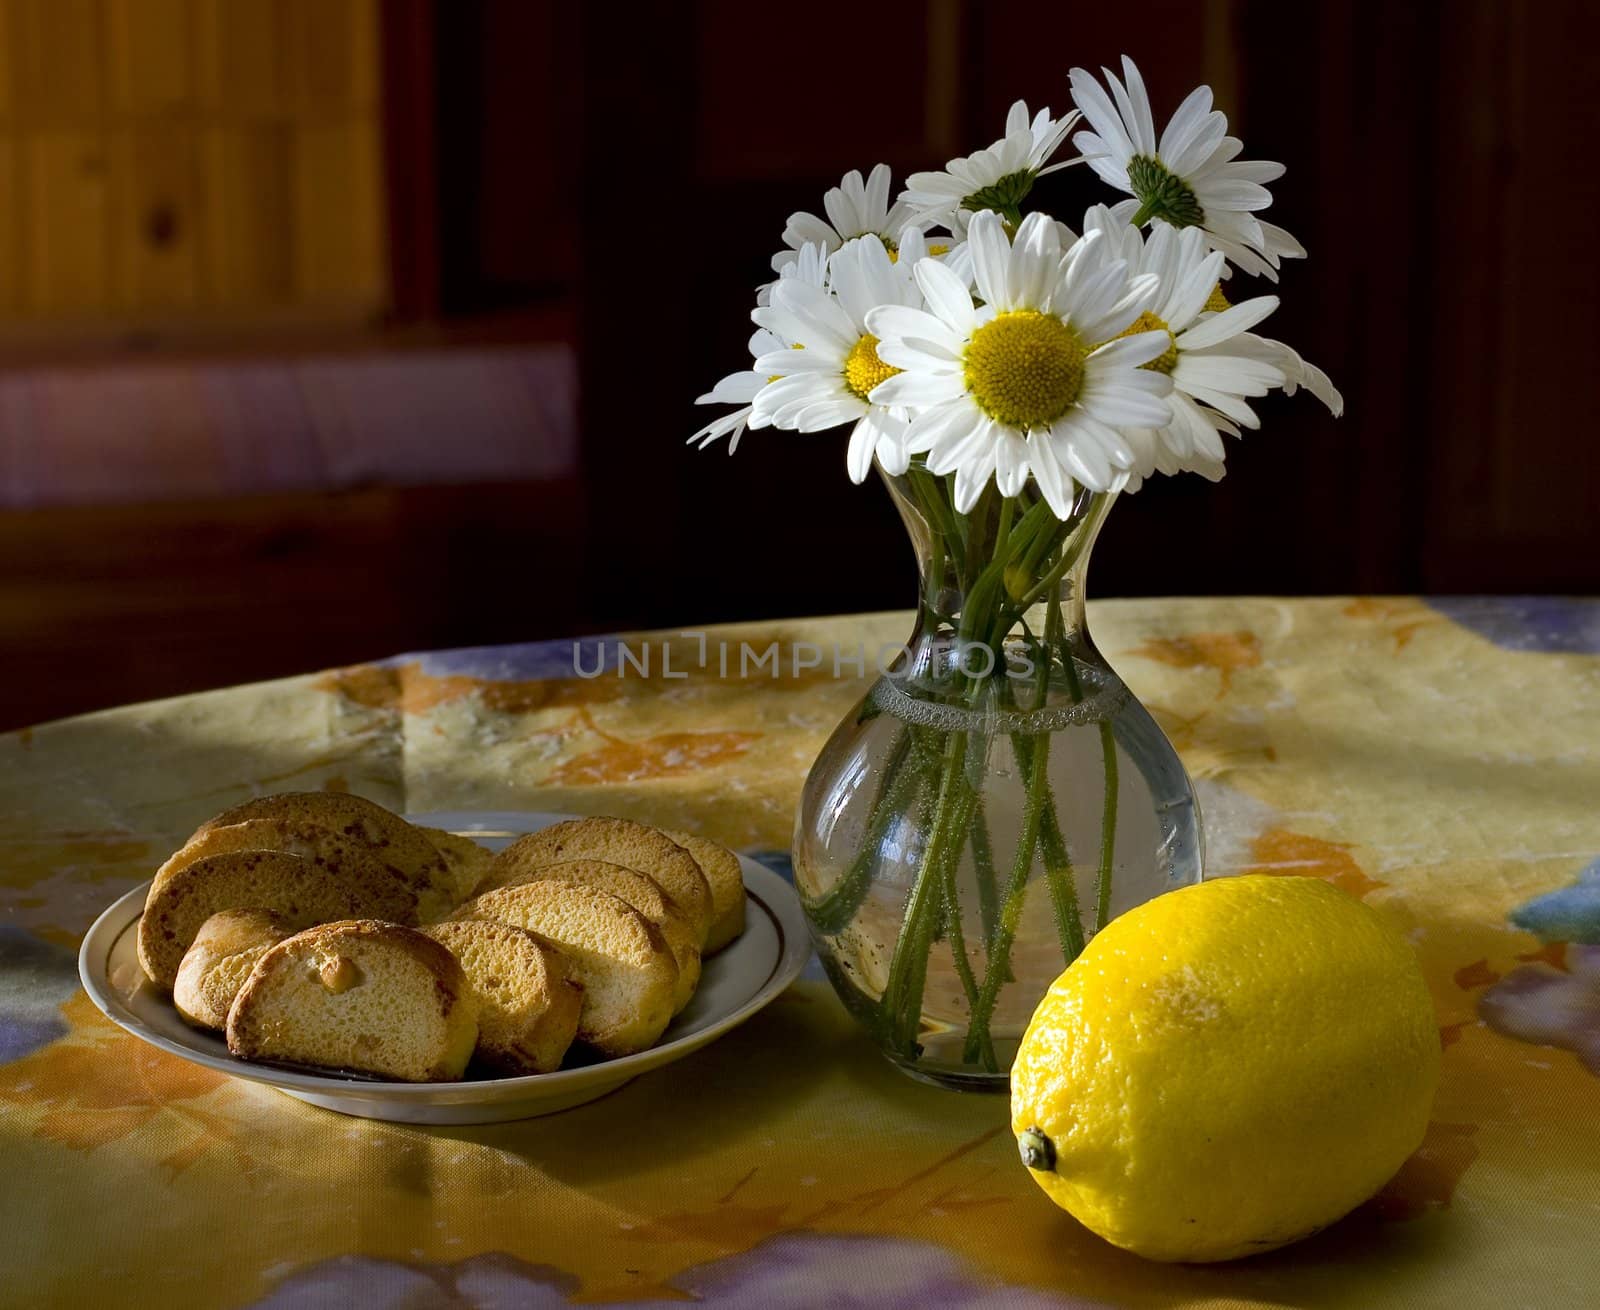 Still life with flowers, baking and lemon.